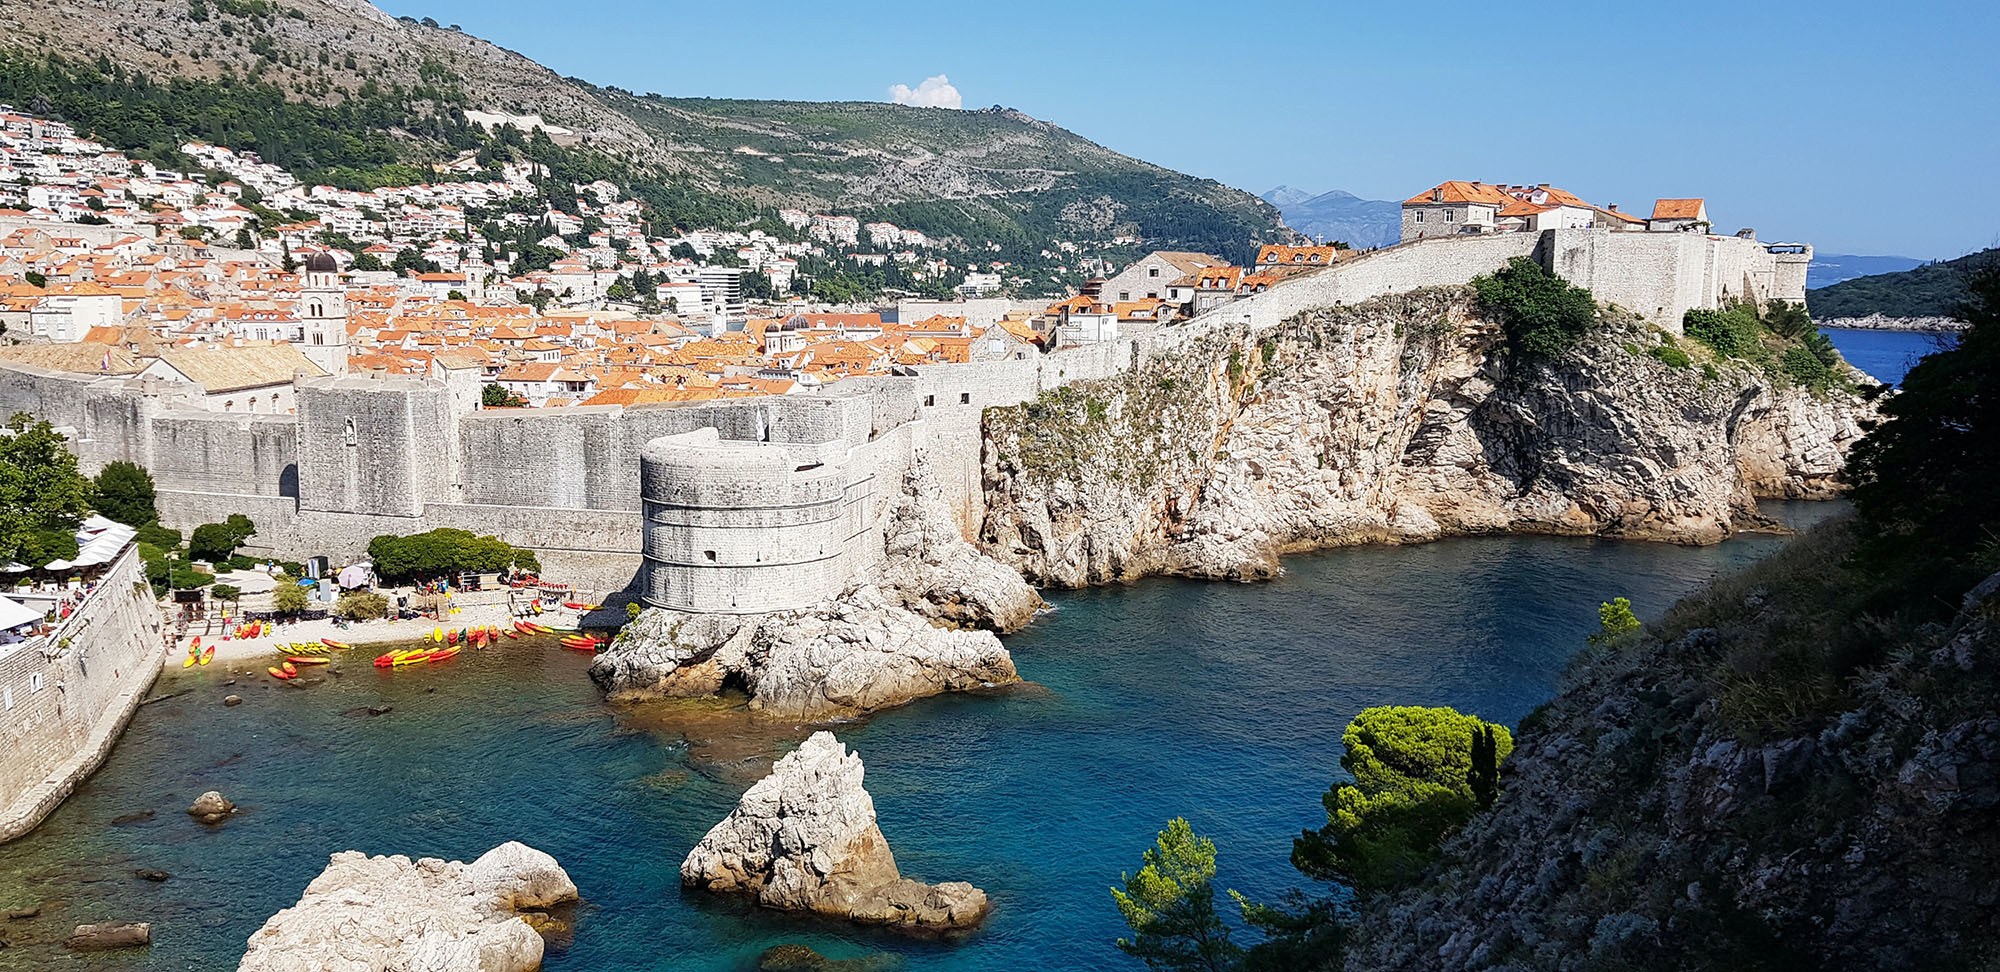 Old part of Dubrovnik Croatia from a distance